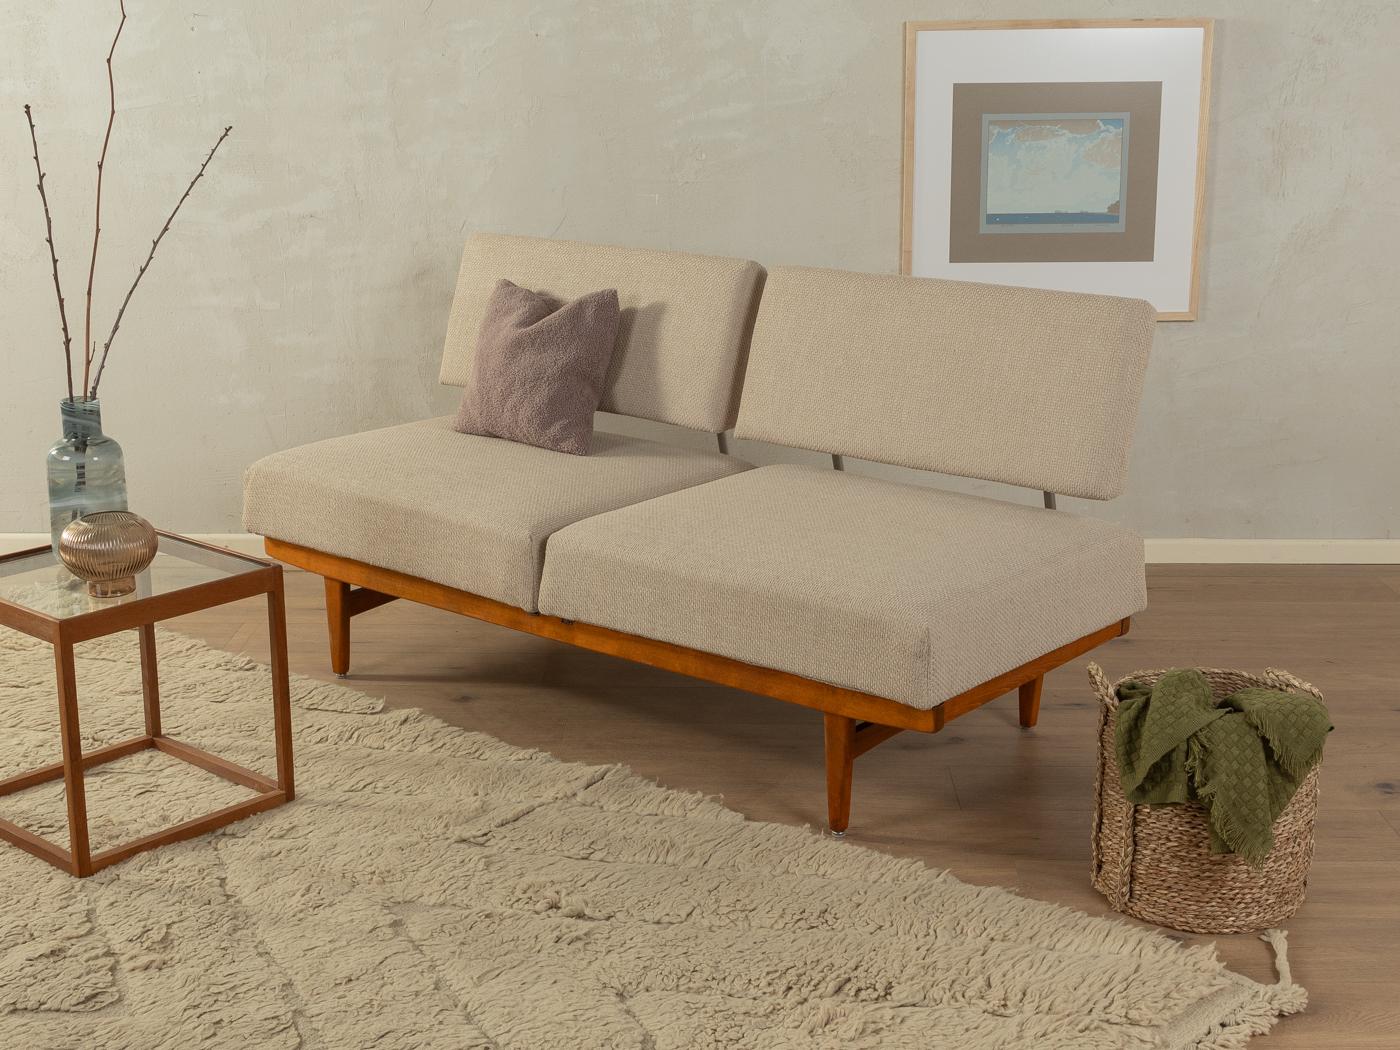 Wonderful sofa from the 1950s. High-quality solid beech wood frame. The sofa can be transformed into a guest bed in just a few simple steps. The original spring core has been reupholstered and covered with a high-quality upholstery fabric in beige.